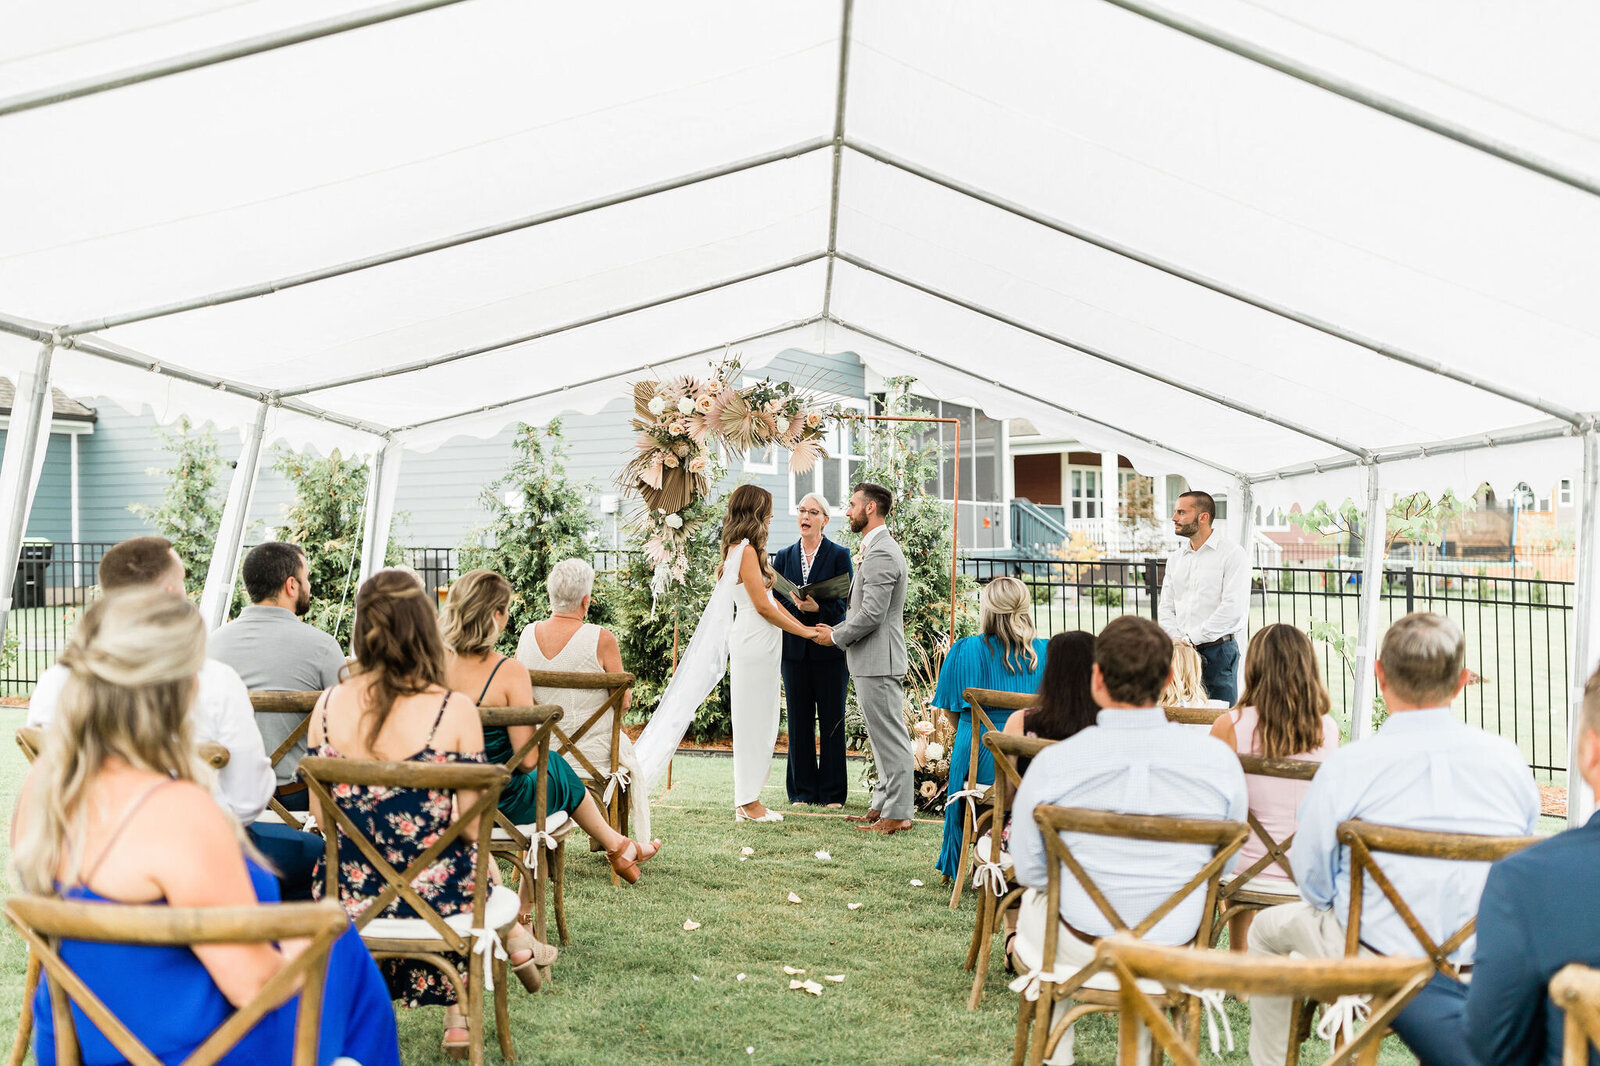 Wedding Reception in a Tent | Raleigh NC | The Axtells Photo and Film